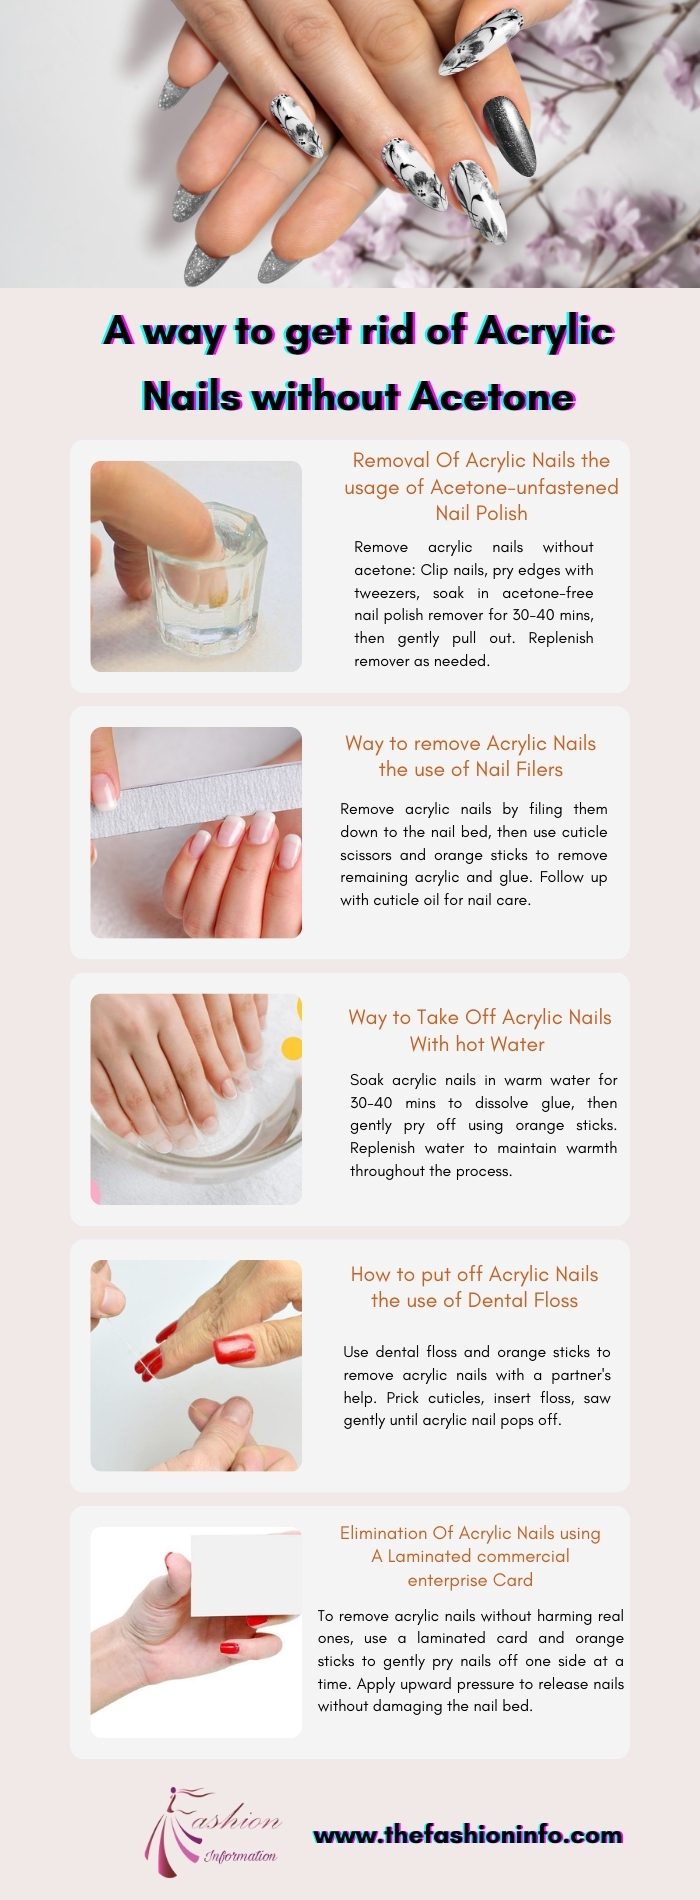 A way to get rid of Acrylic Nails without Acetone